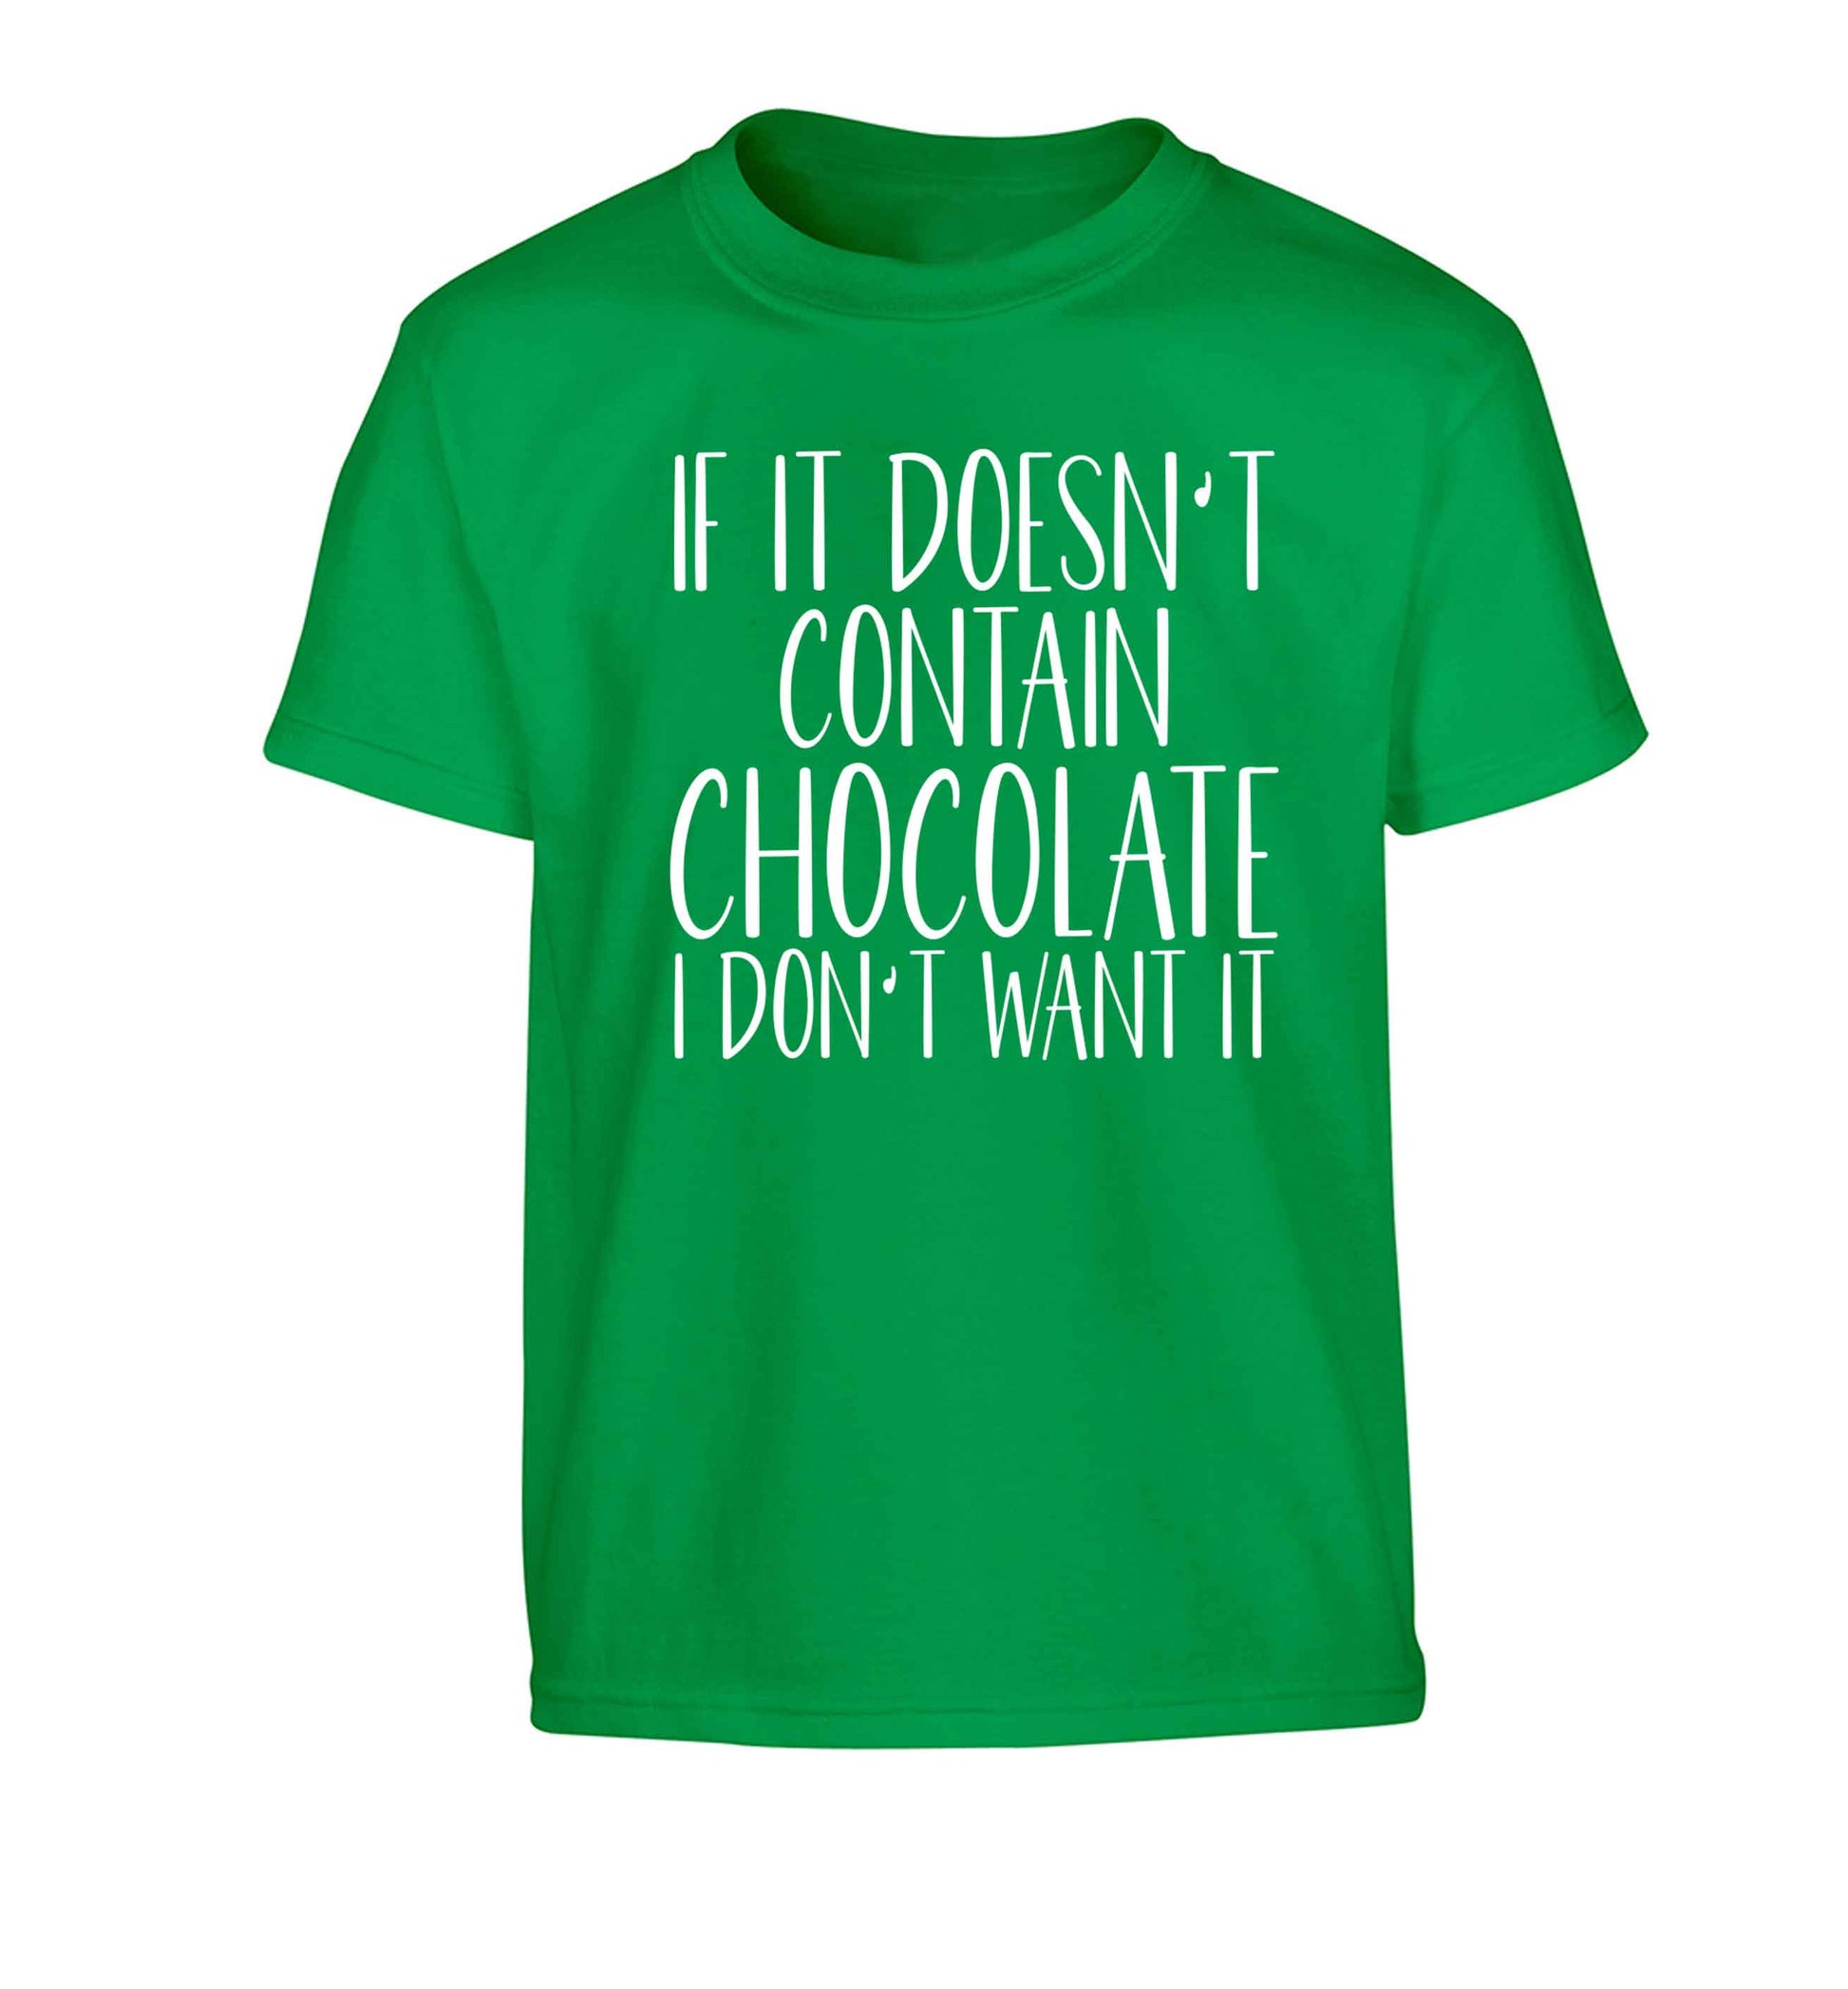 If it doesn't contain chocolate I don't want it Children's green Tshirt 12-13 Years